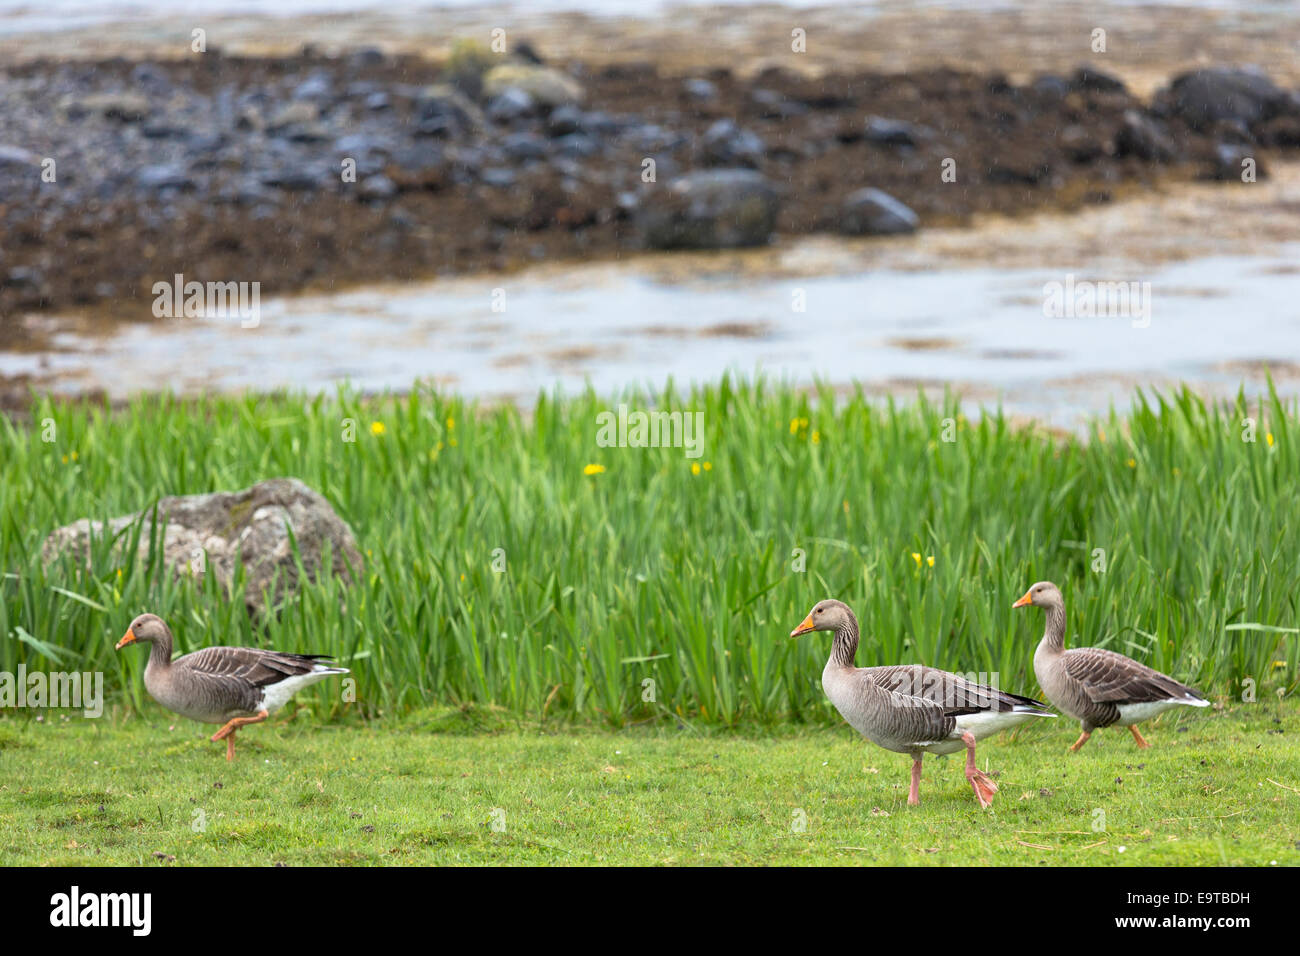 Greylag geese, Anser anser, - Greylags - walking on Isle of Mull in the Inner Hebrides and Western Isles, West Coast of SCOTLAND Stock Photo